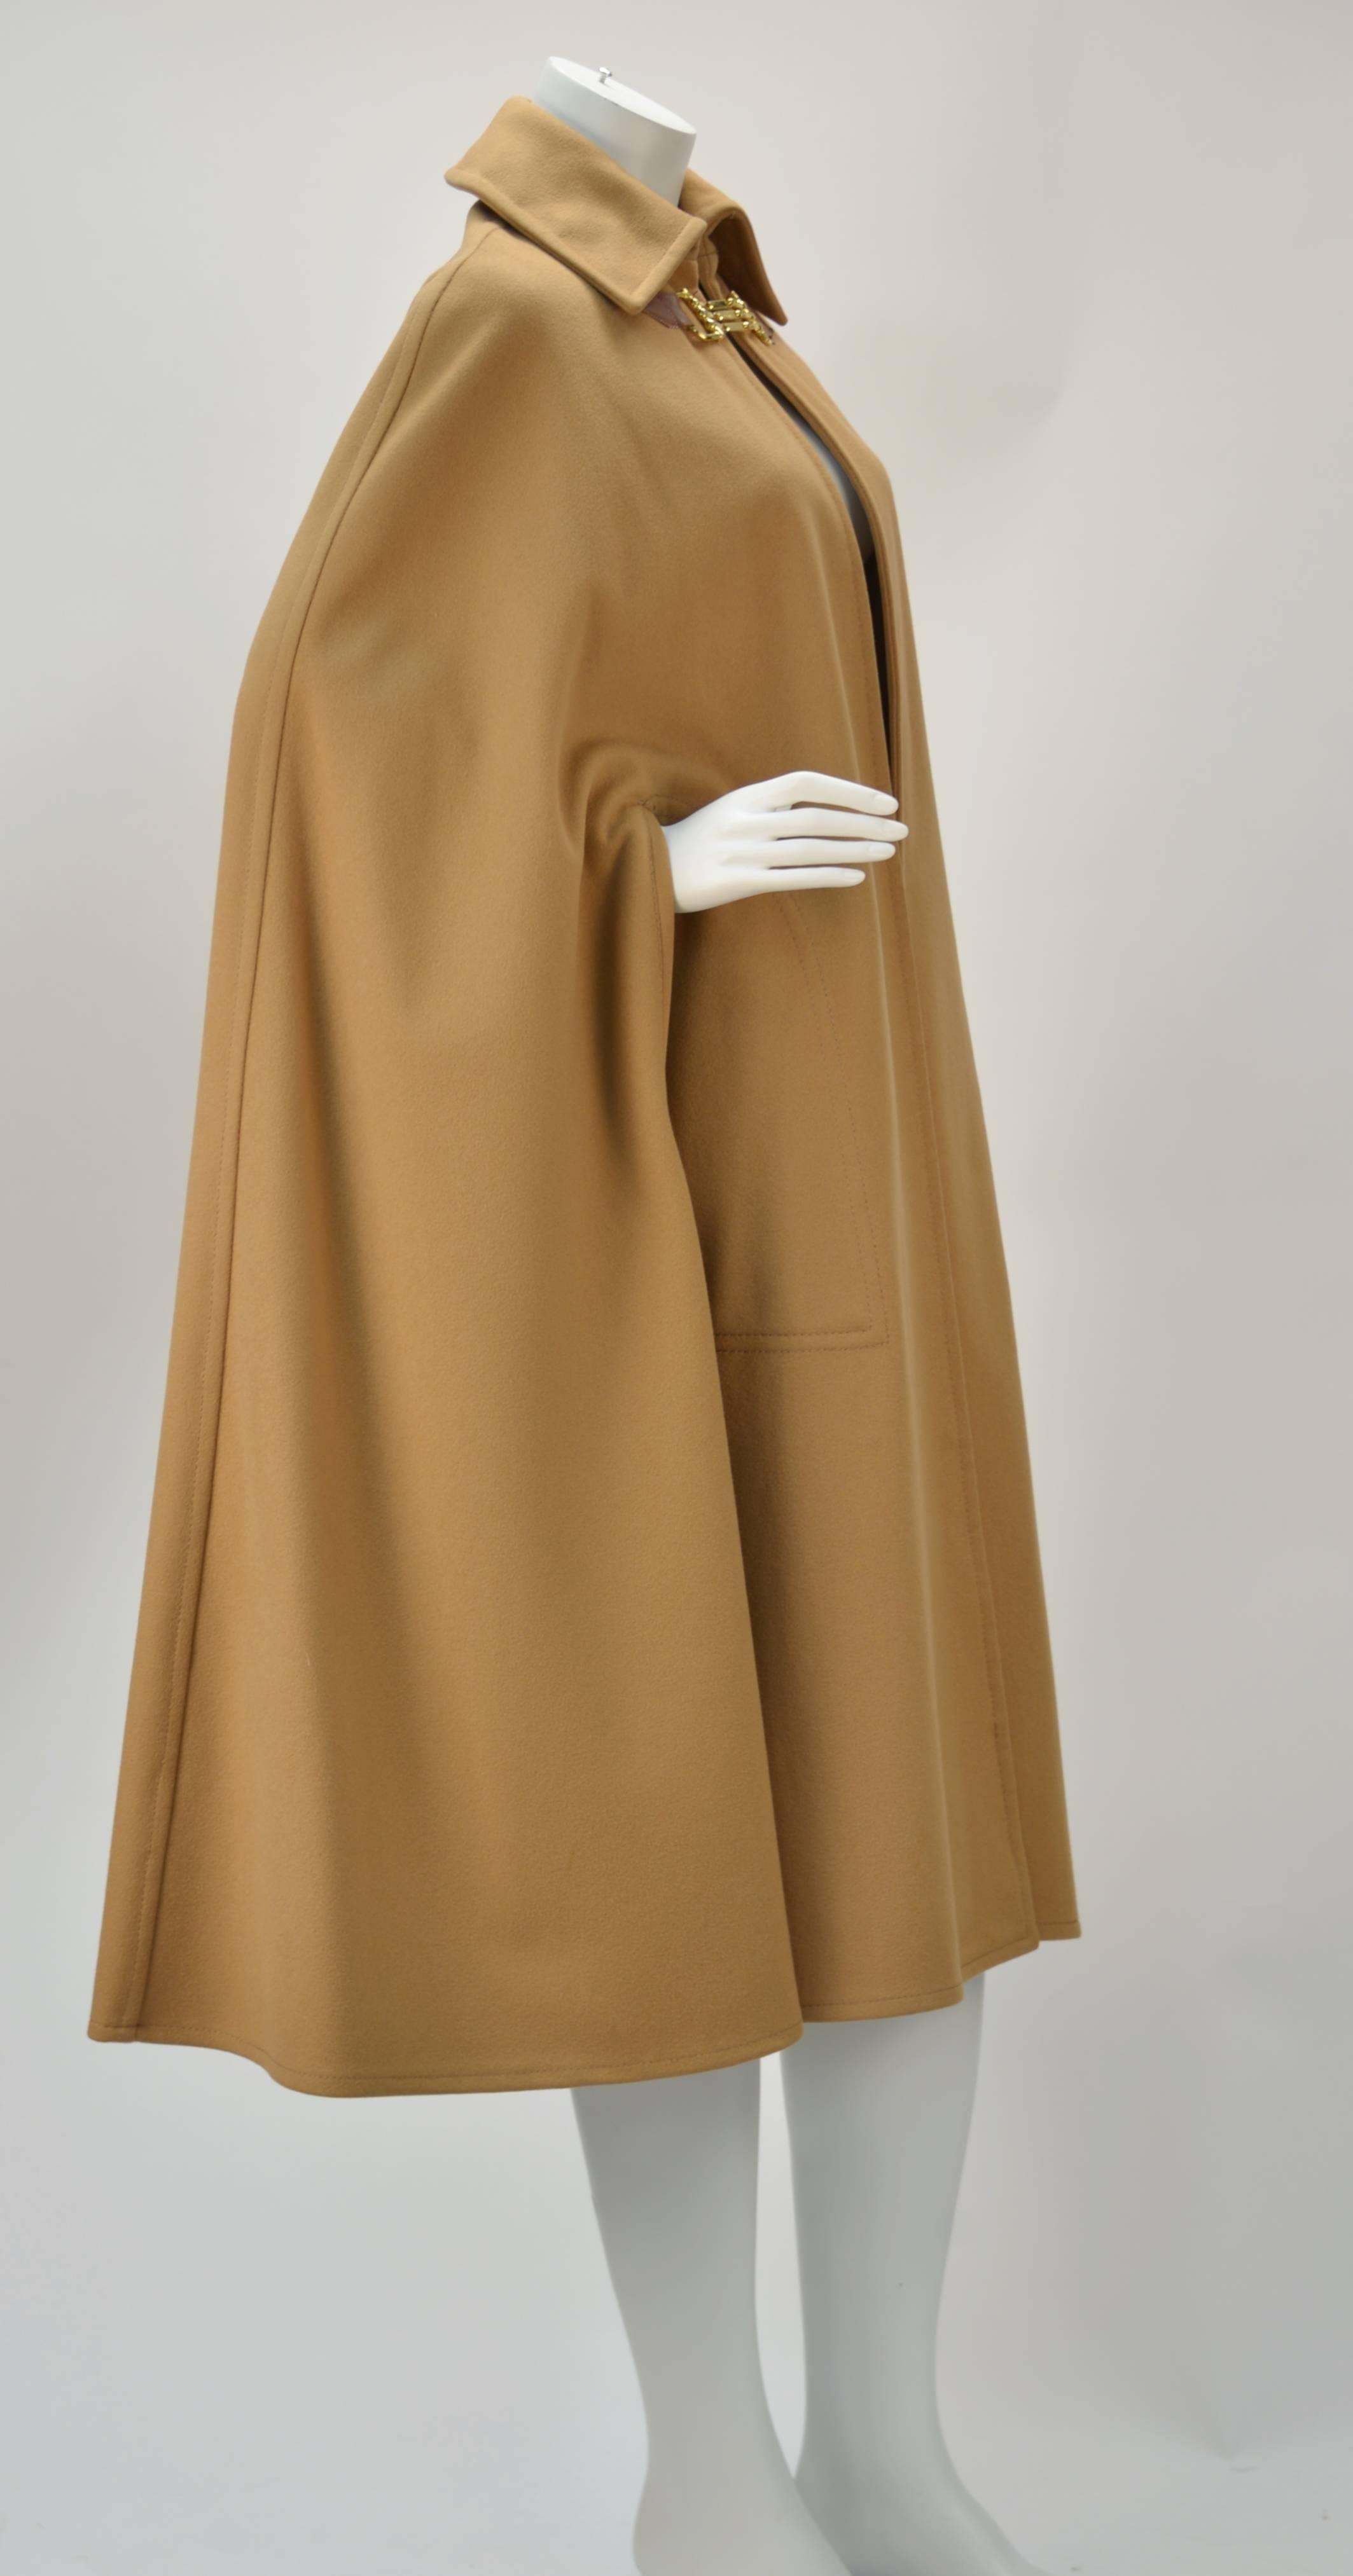 Perfect for the upcoming fall season...Celine dark tan colored wool cape with gold tone claw-like clasp that fastens at the neck. The clasp has CELINE stamped on the middle claw. Brown leather decorative straps hold the clasps into place. 

Dress